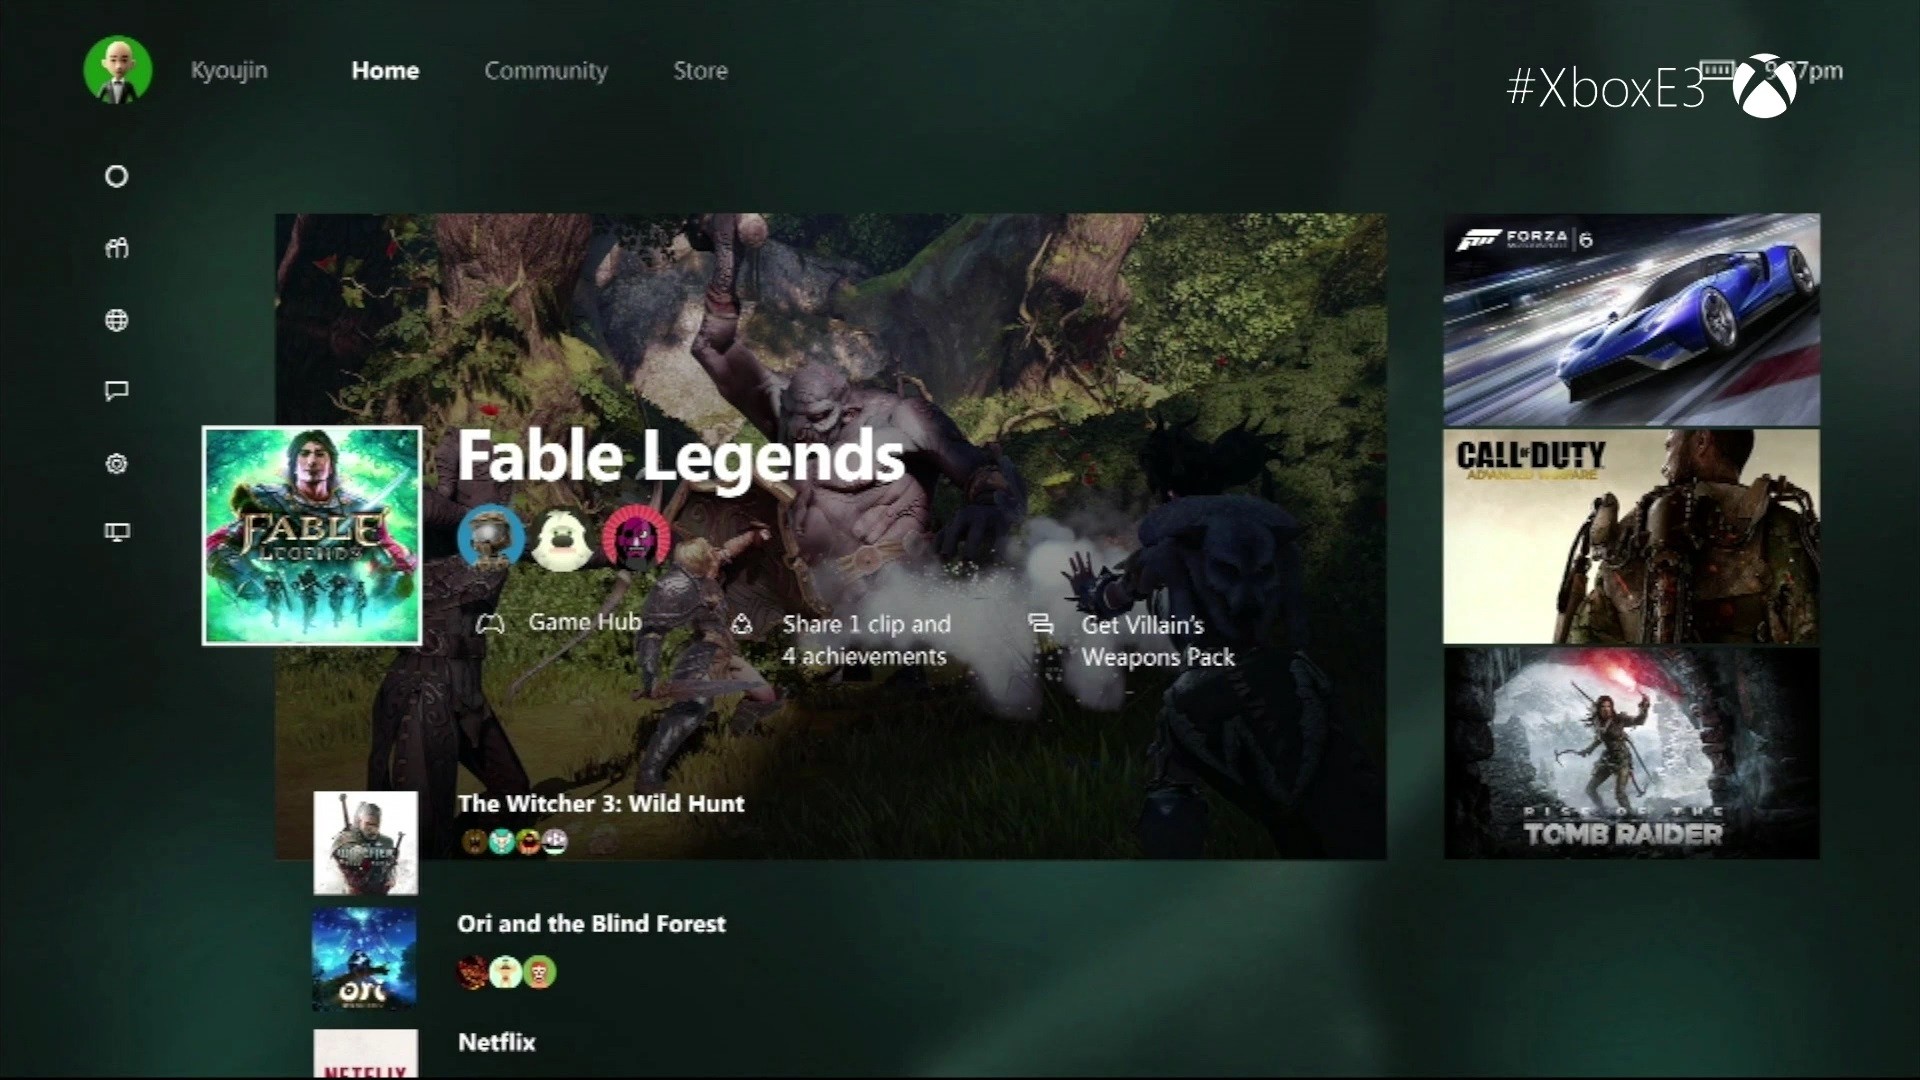 xbox-one-gets-new-video-showing-revamped-experience-and-new-features-485095-2.jpg